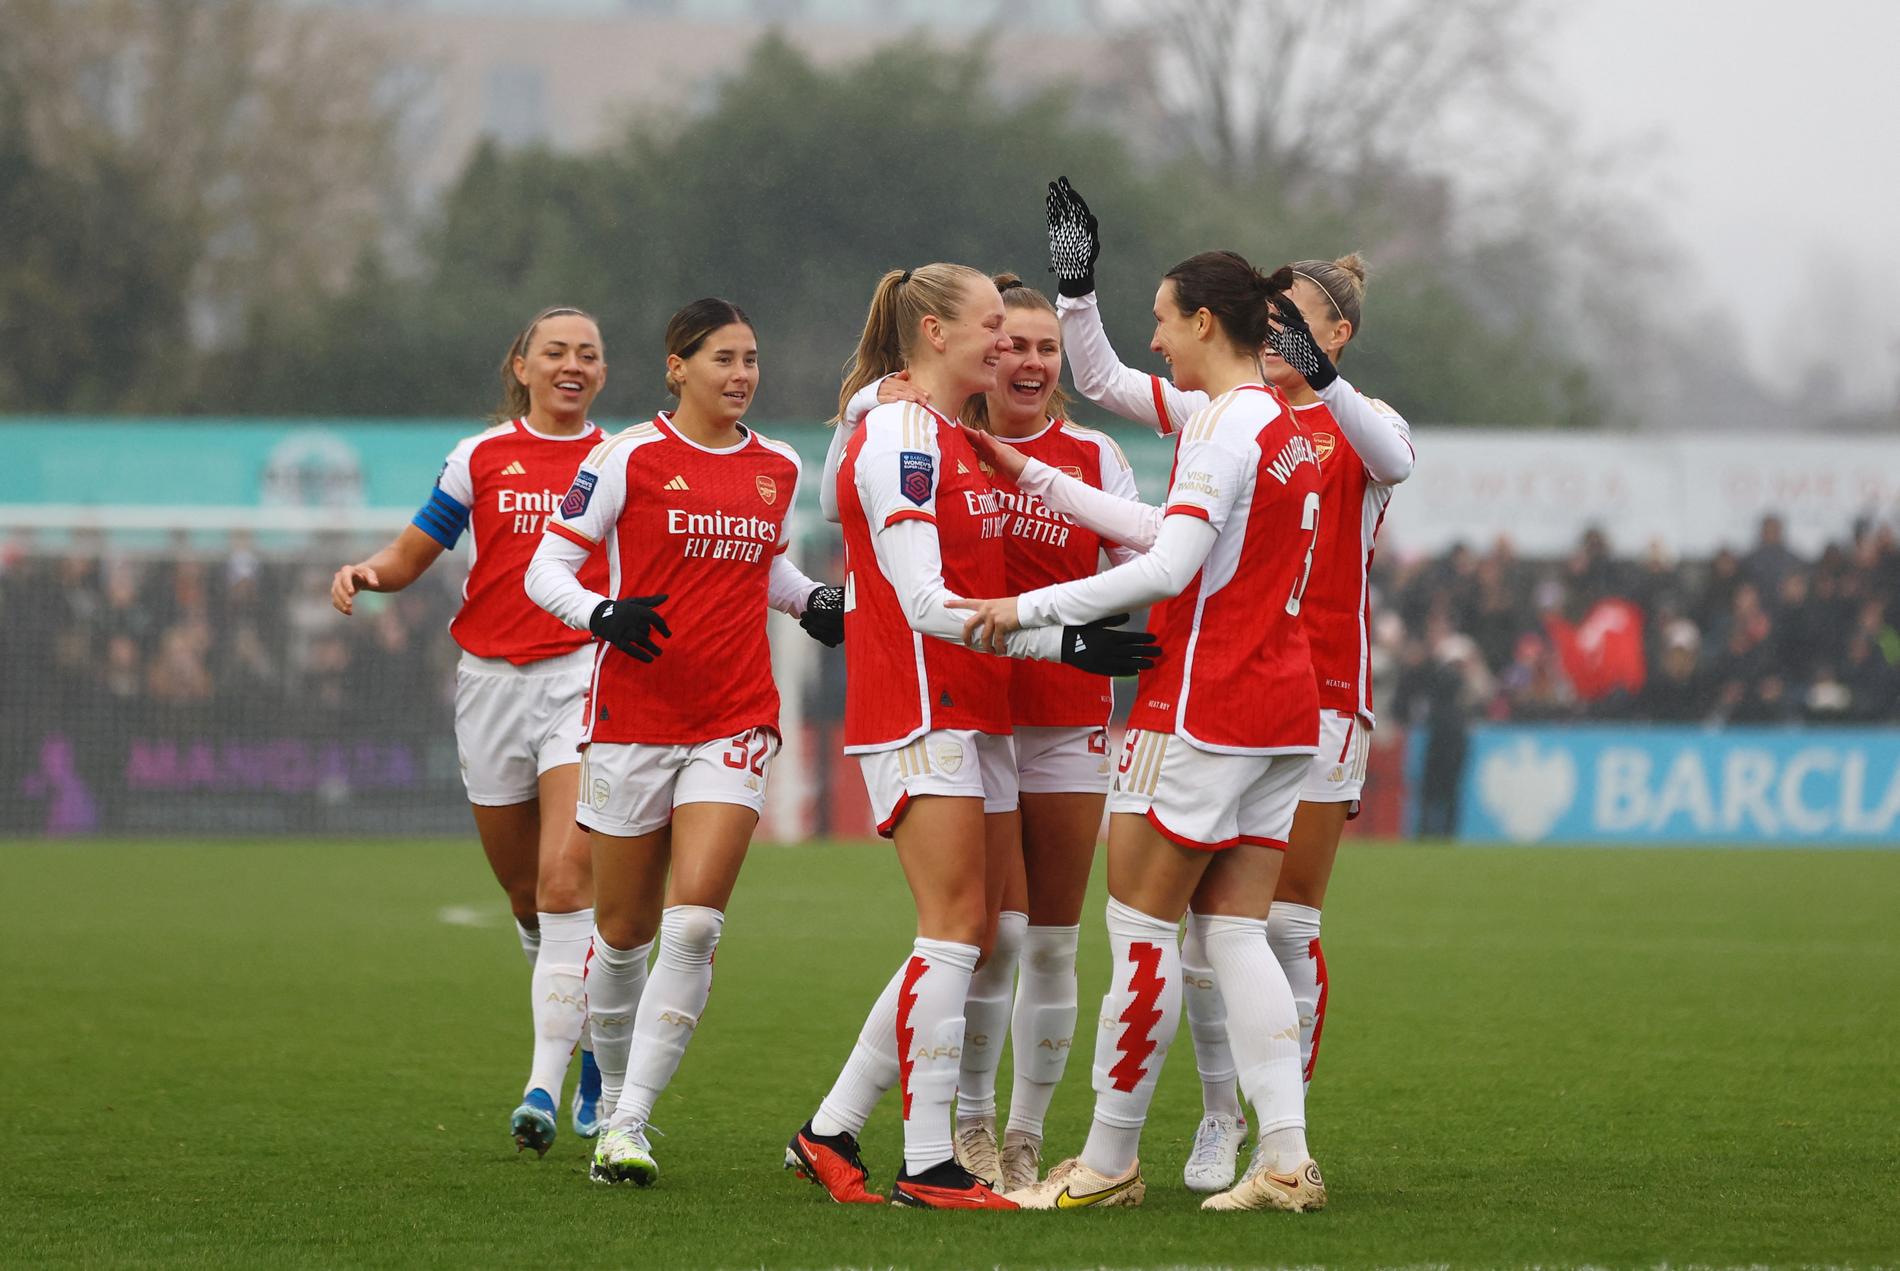 Ready for the first match: Frida Mannum and the rest of the Arsenal players celebrate scoring goals earlier this season.  Chelsea is expected to face a strong match on Sunday.